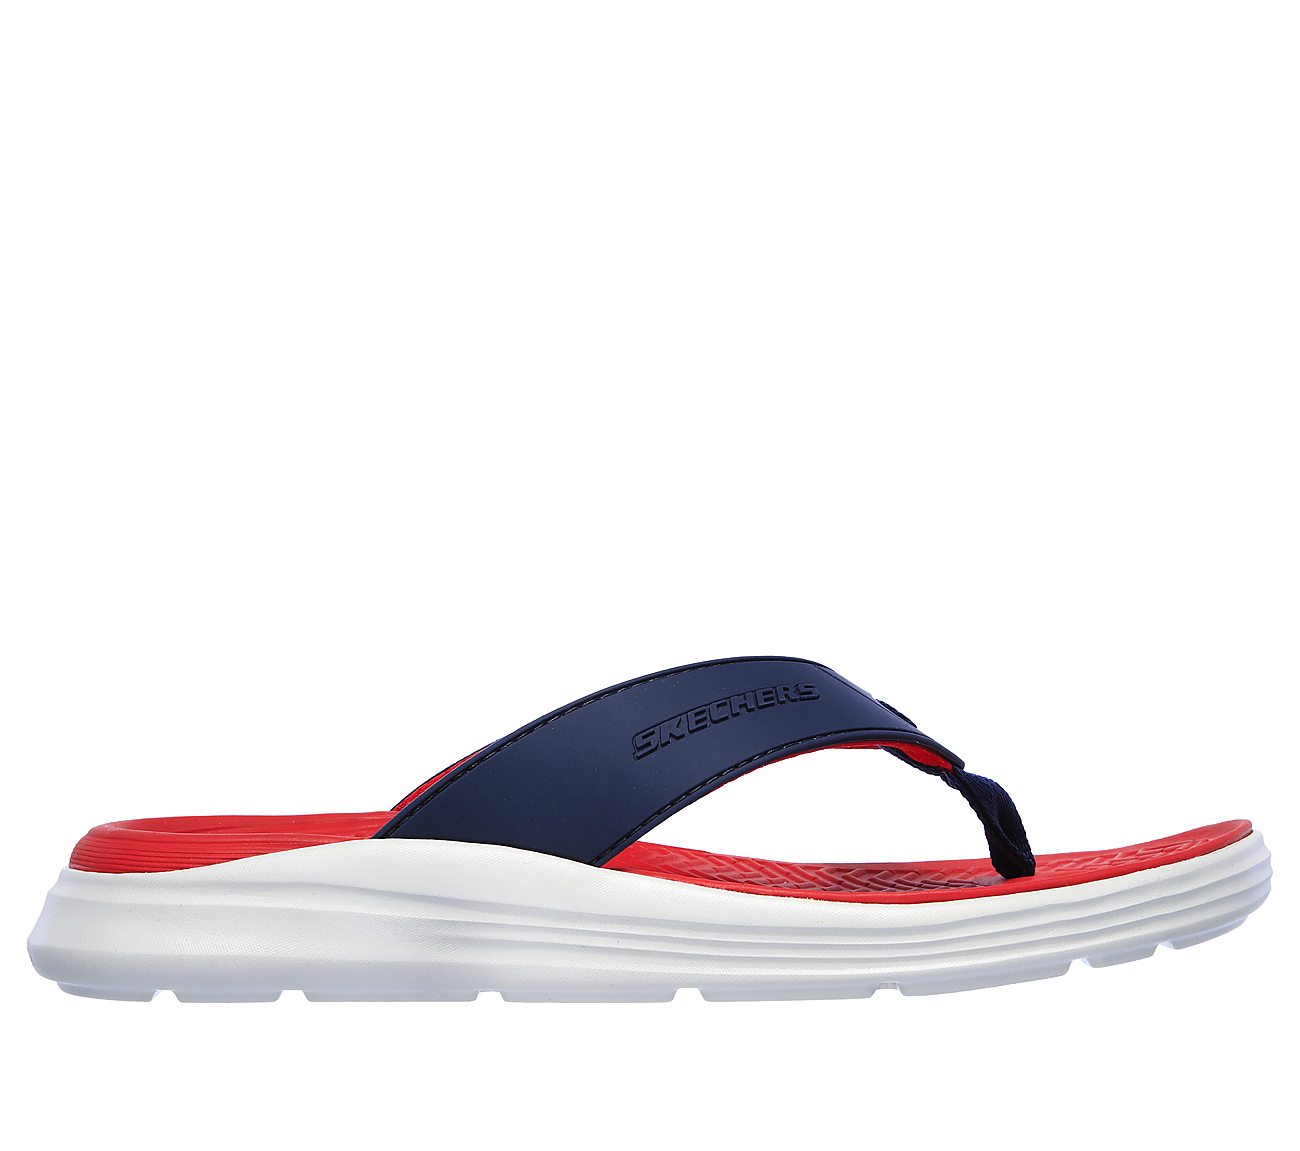 Buy SKECHERS Relaxed Fit: Sargo - Sunview USA Casuals Shoes